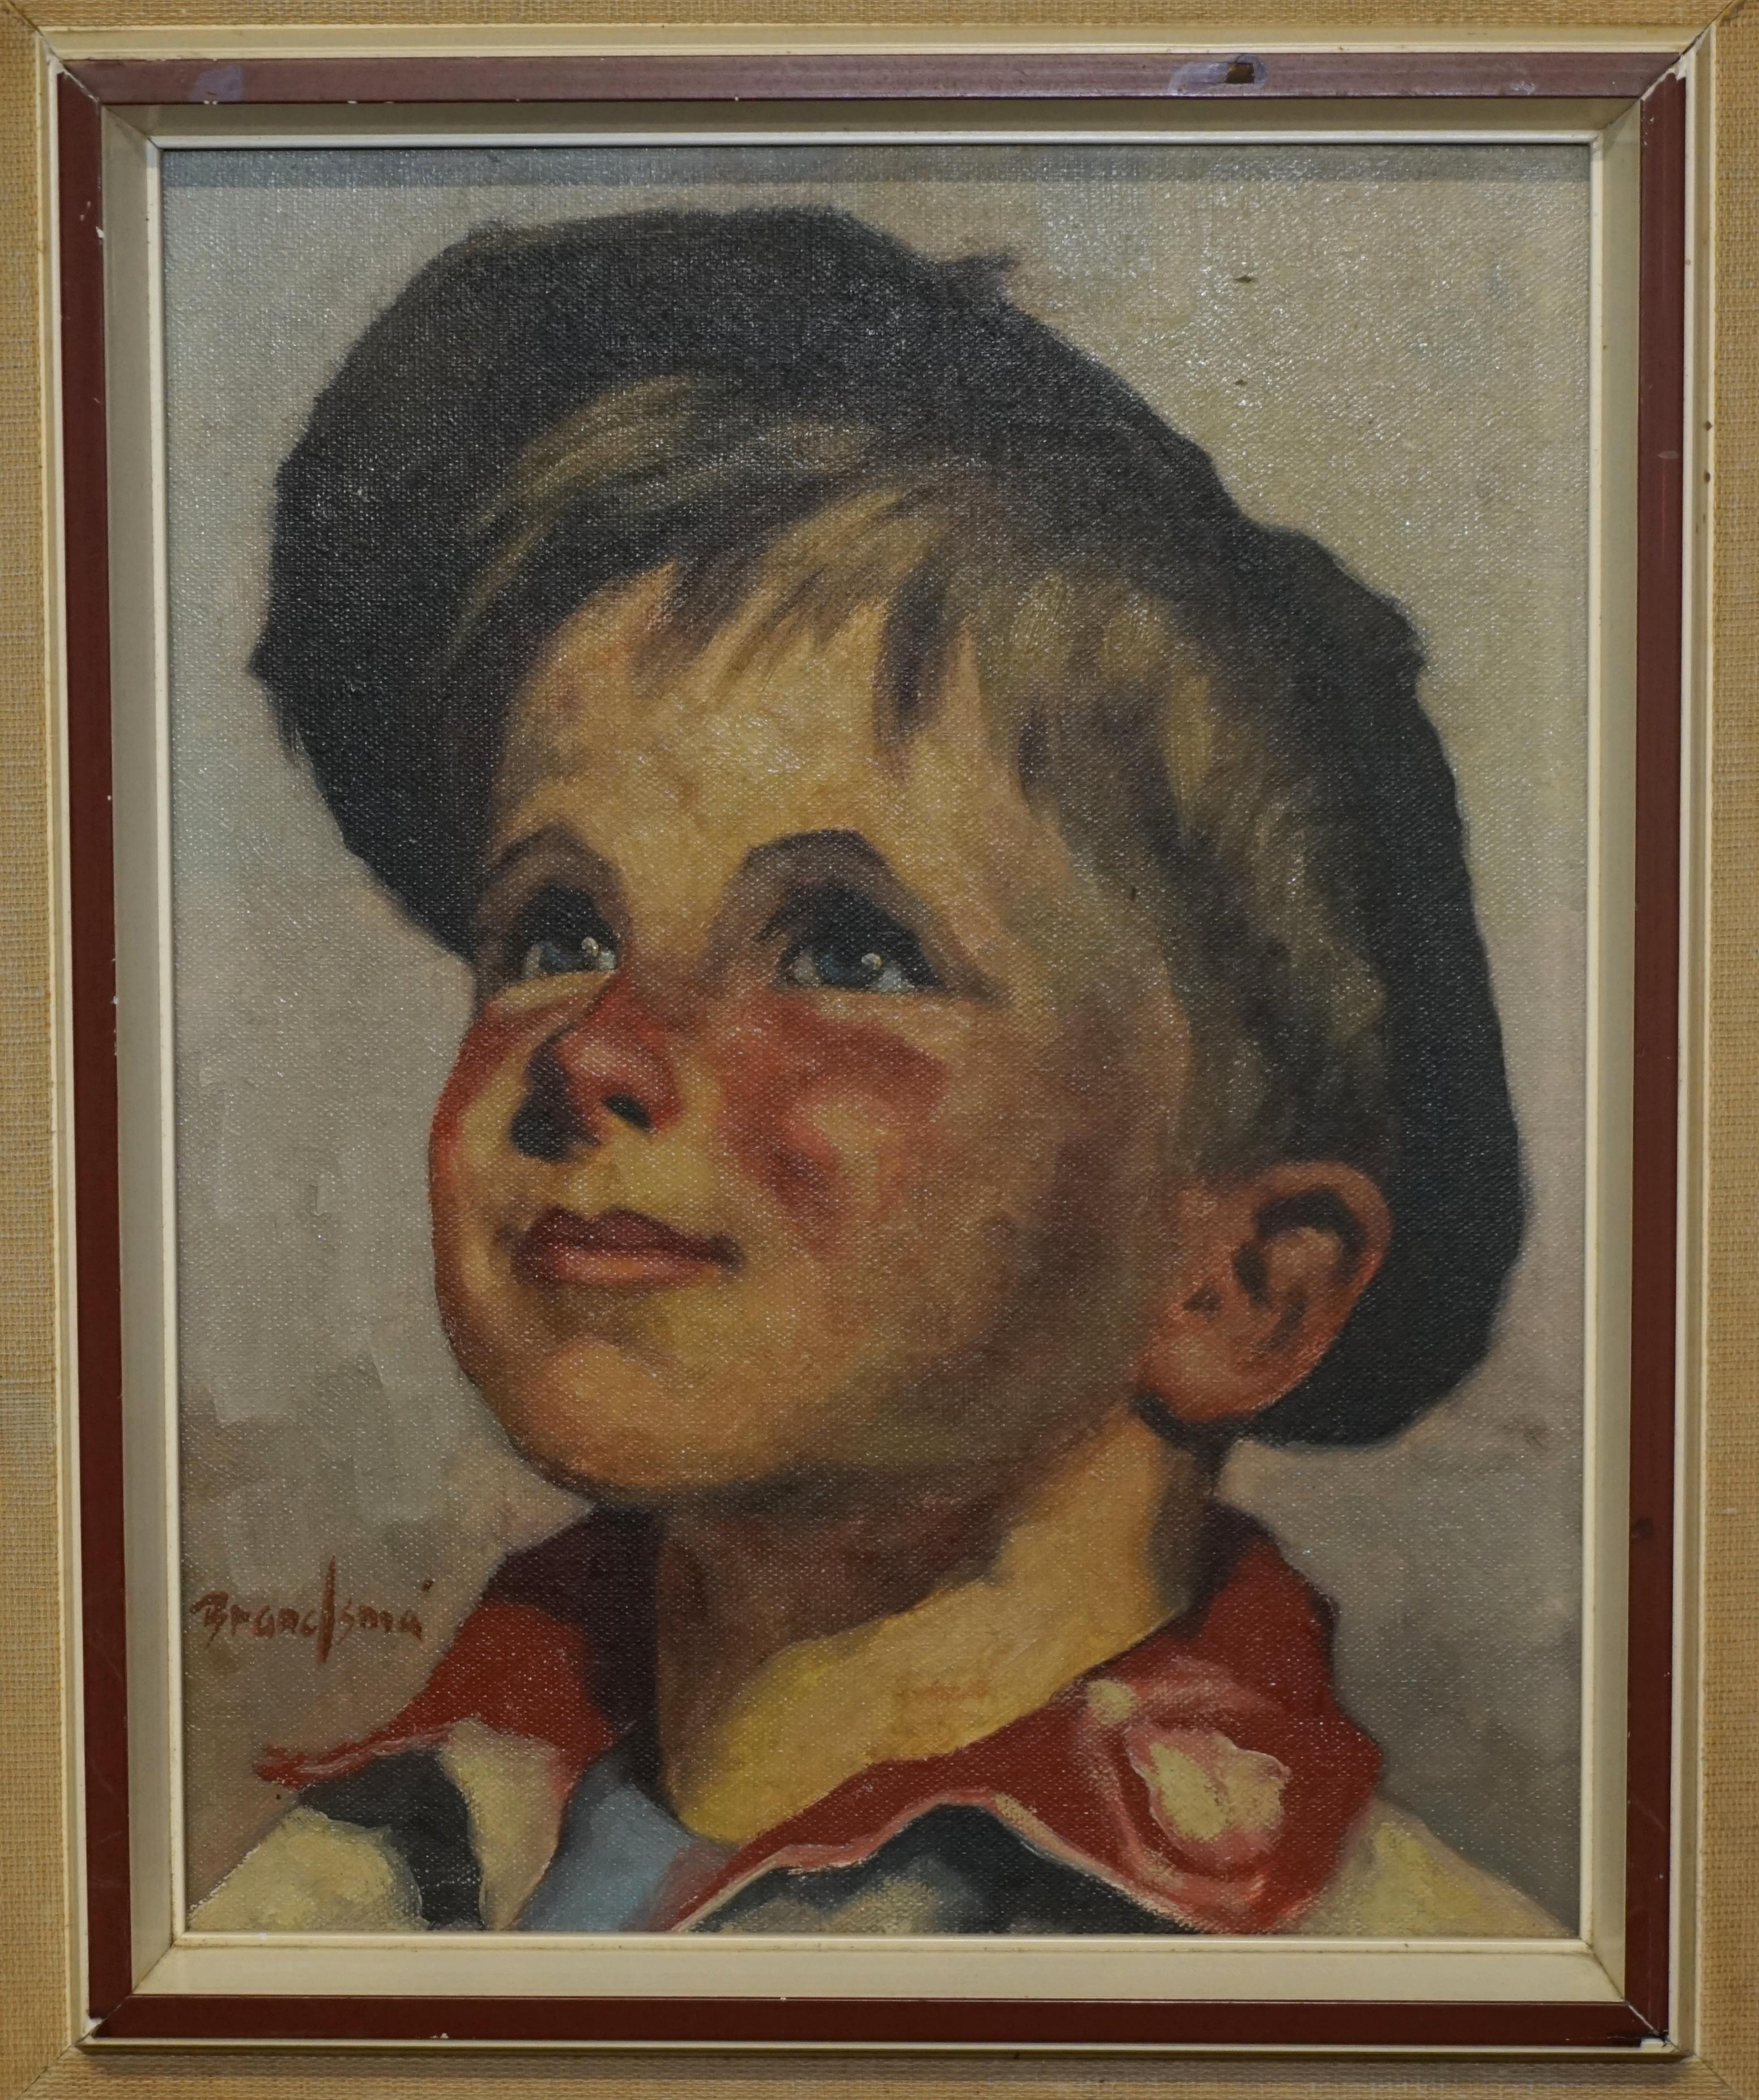 We are delighted to offer for sale this lovely original circa 1930s Belgium oil on canvas of young boy in a cap which is part of a suite

I have seven of these lifestyle, natural Dutch and Belgium oil paintings, the others are all listed under my